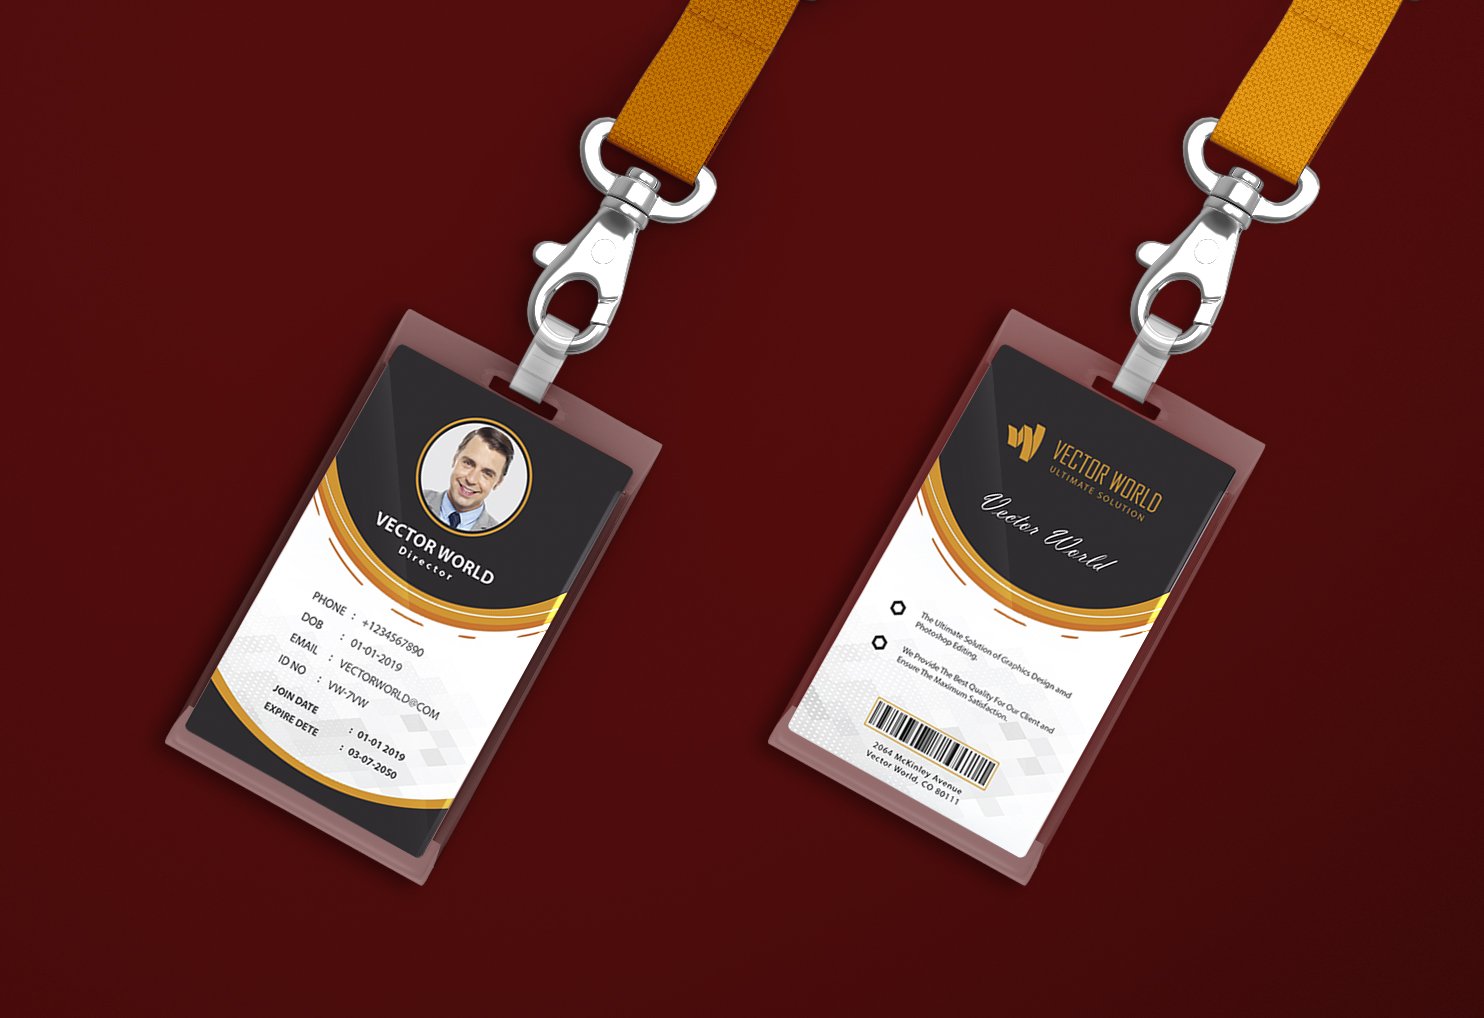 ID Card Design Professional within 24 hours for $5 - SEOClerks